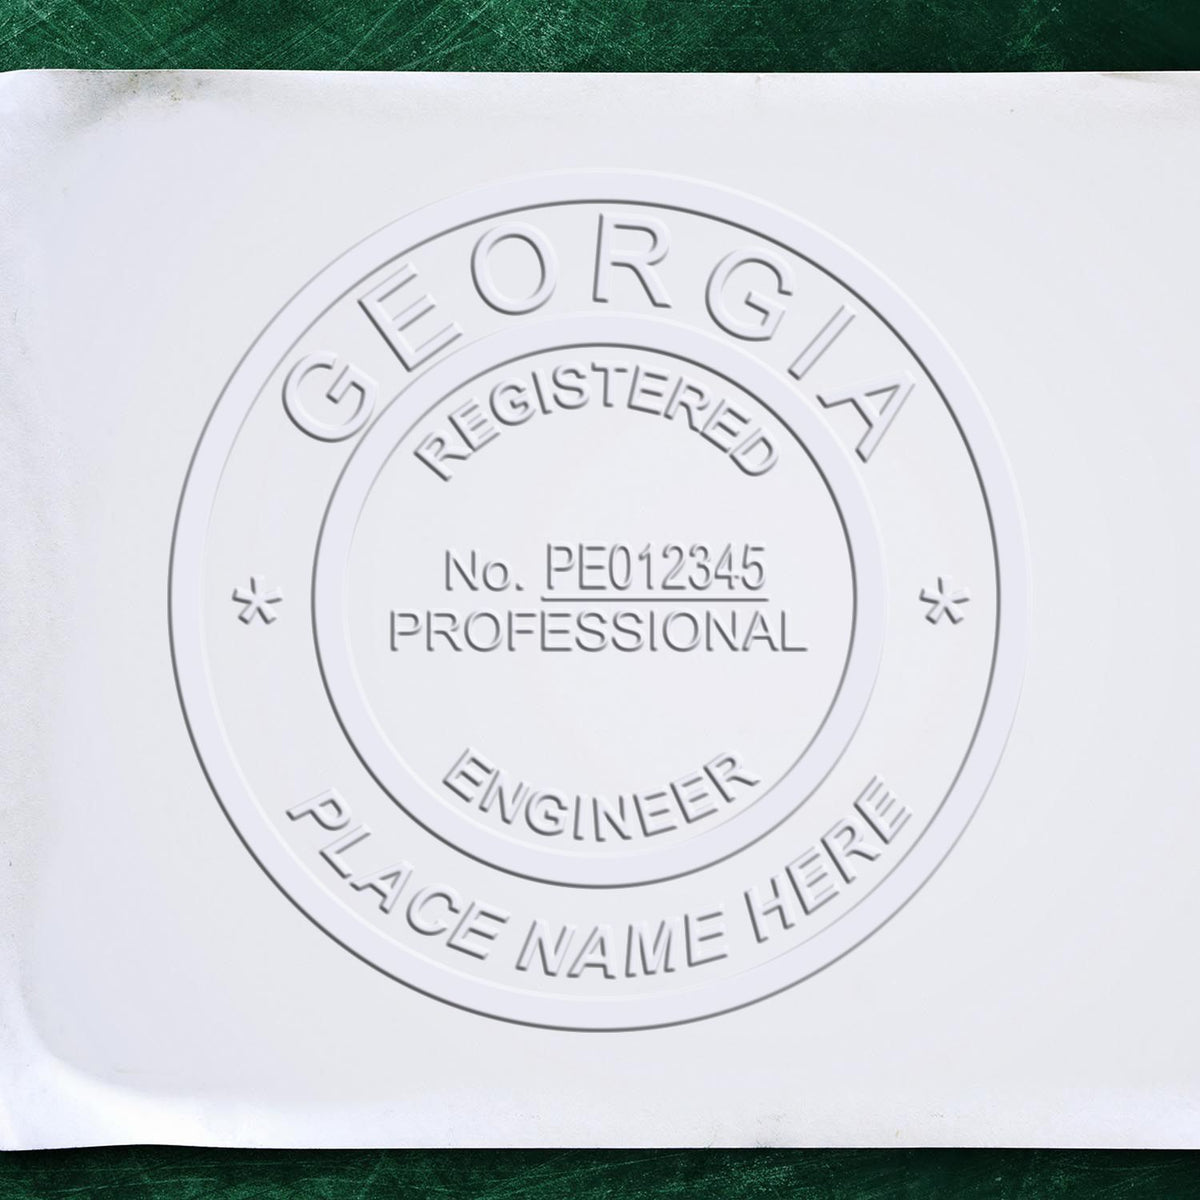 The State of Georgia Extended Long Reach Engineer Seal stamp impression comes to life with a crisp, detailed photo on paper - showcasing true professional quality.